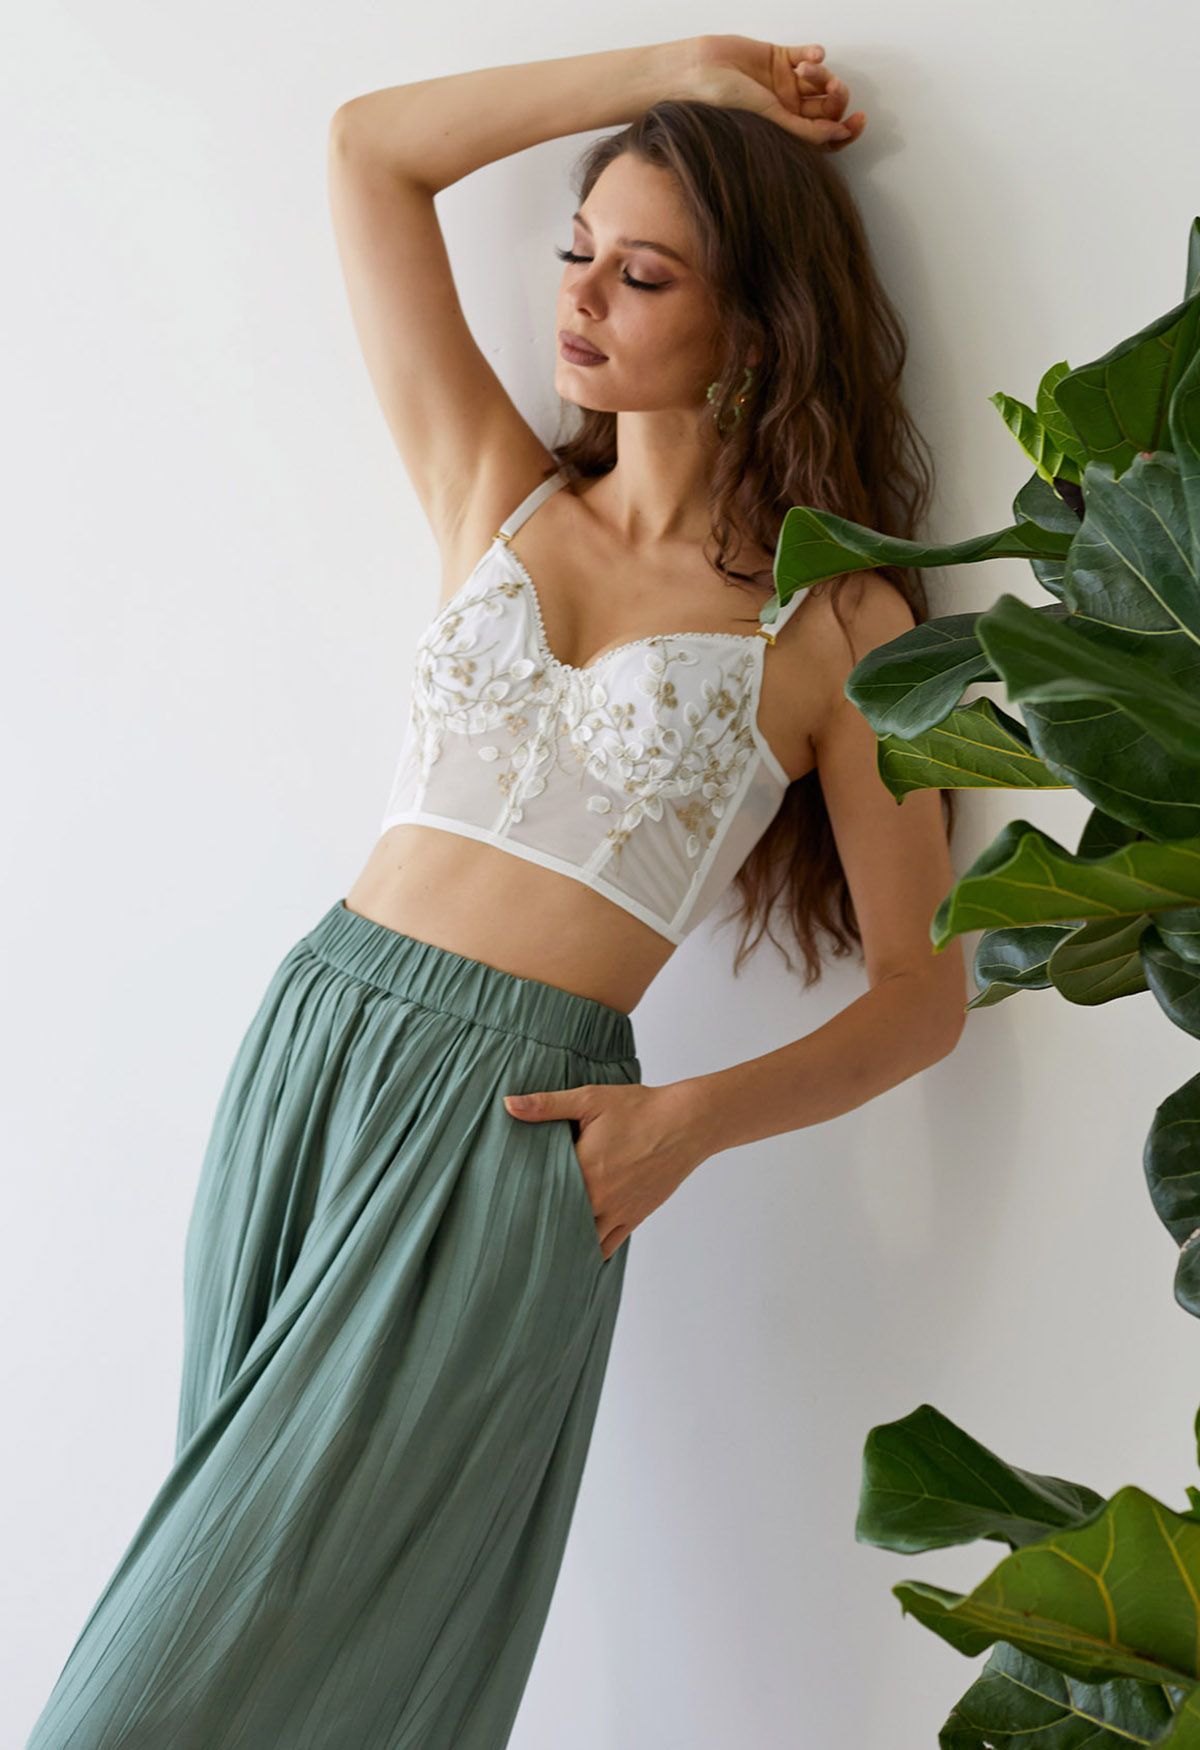 Branch Embroidered Mesh Bra Top in White - Retro, Indie and Unique